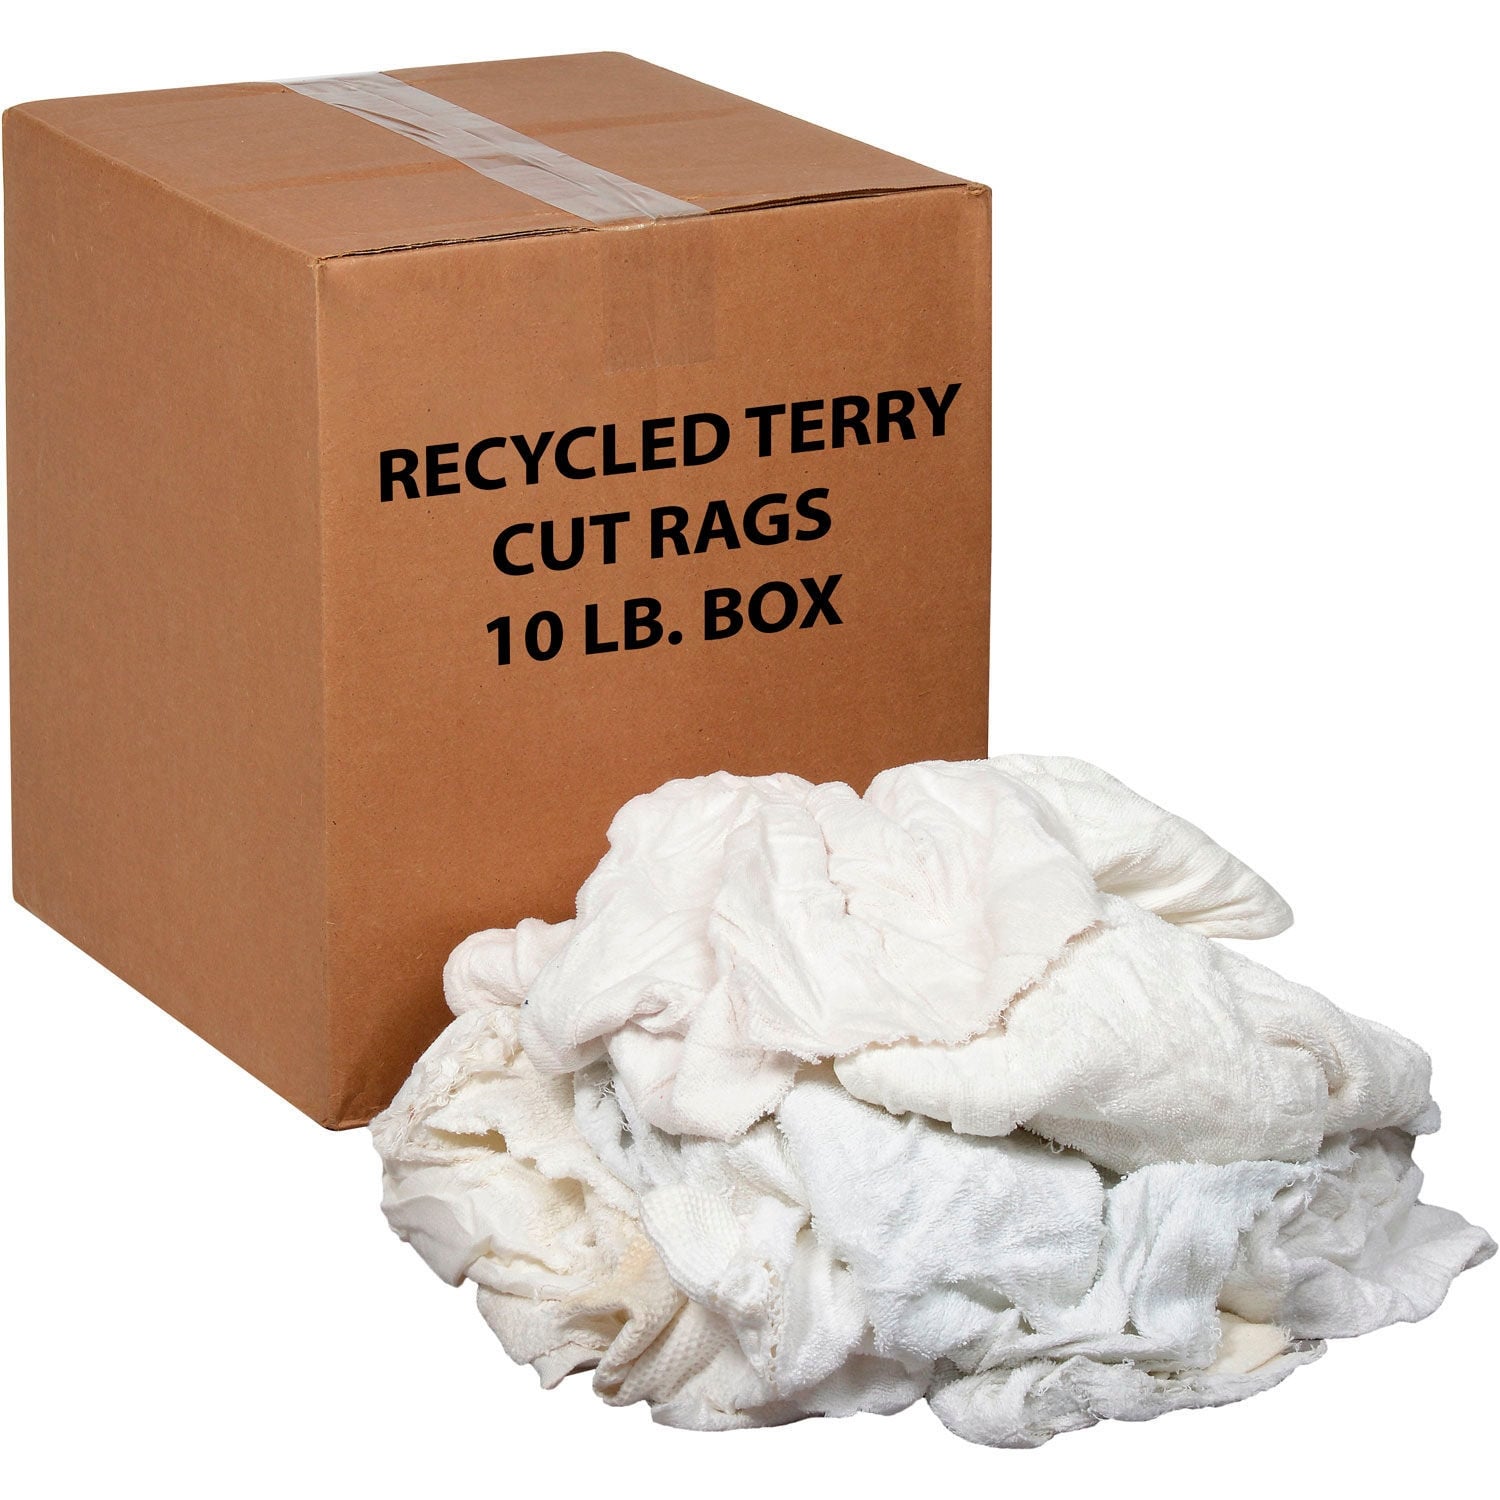 10 Lb. Box Premium Recycled Cotton Terry Cut Rags,...